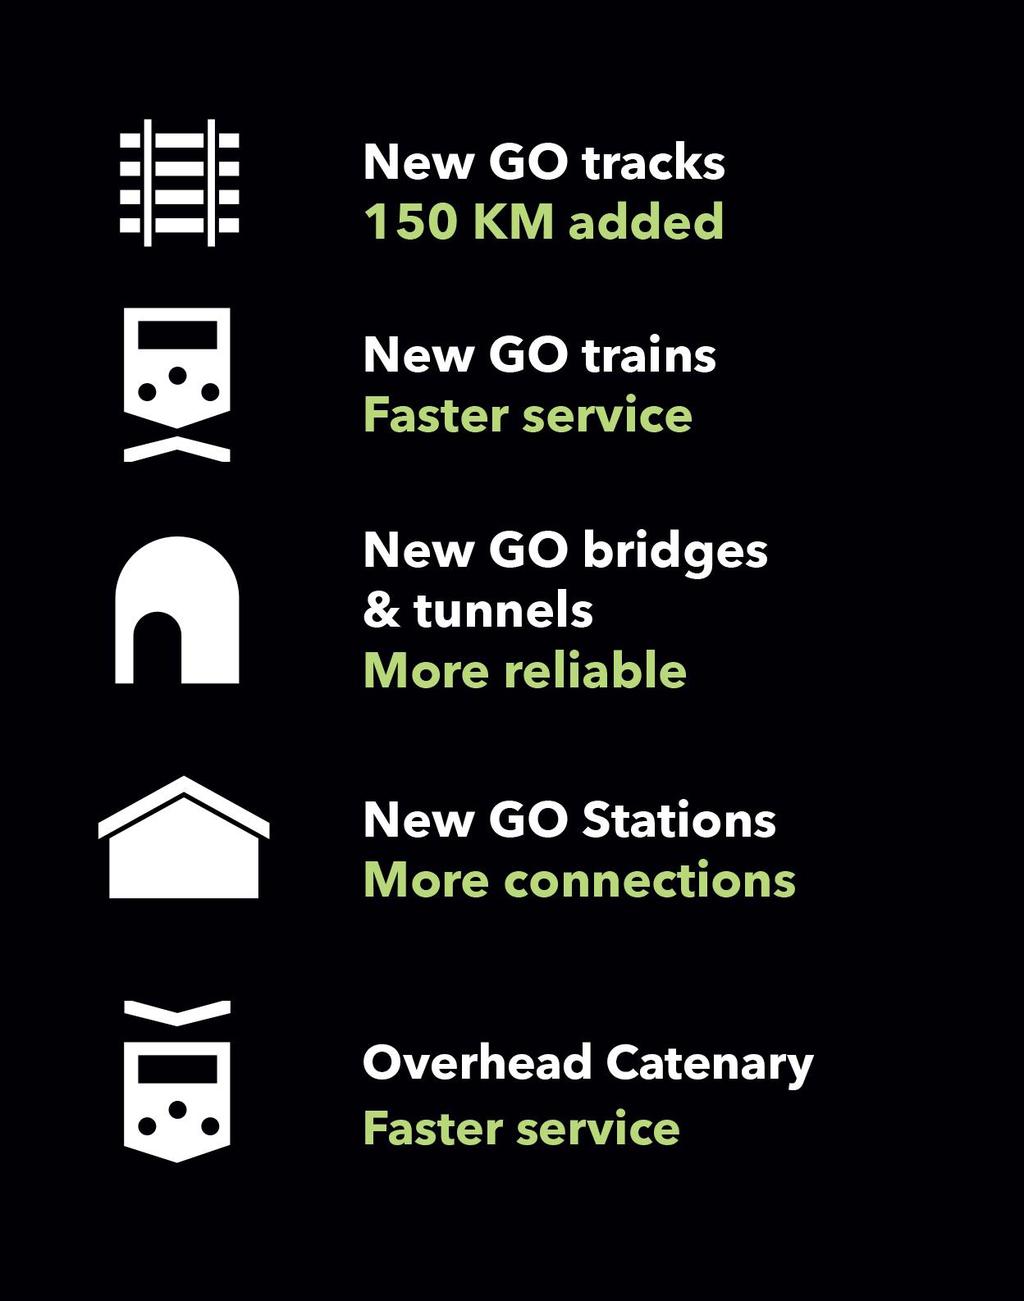 GO RAIL EXPANSION 150 kilometers of new dedicated GO track will allow for more uninterrupted service New electric trains will travel faster for longer and reduce travel times Bridges and tunnels that